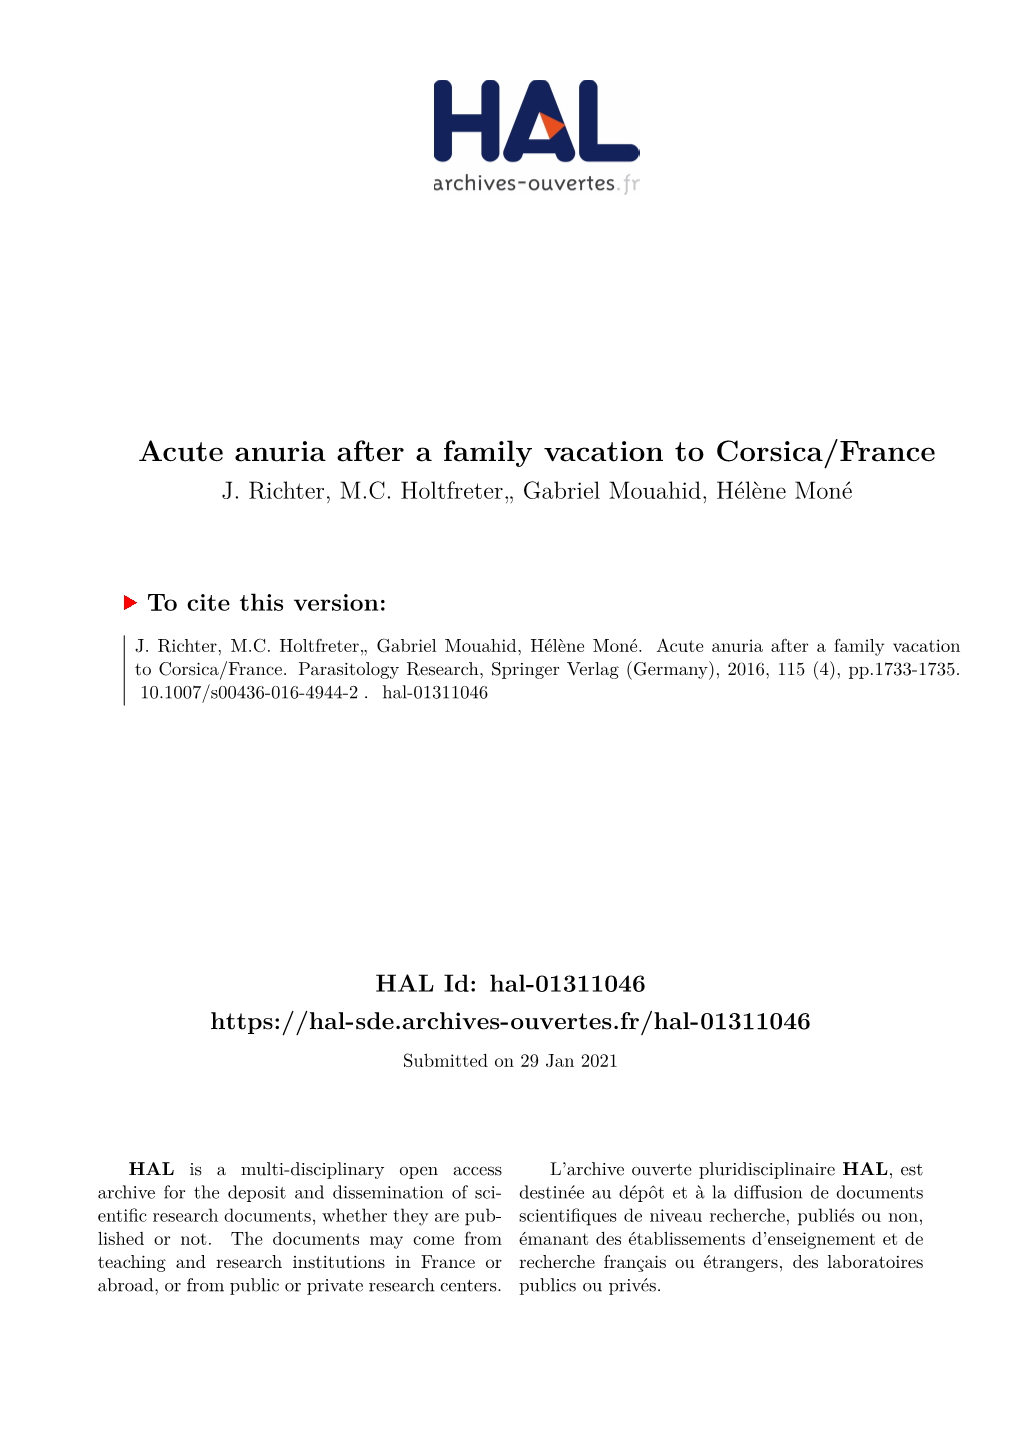 Acute Anuria After a Family Vacation to Corsica/France J